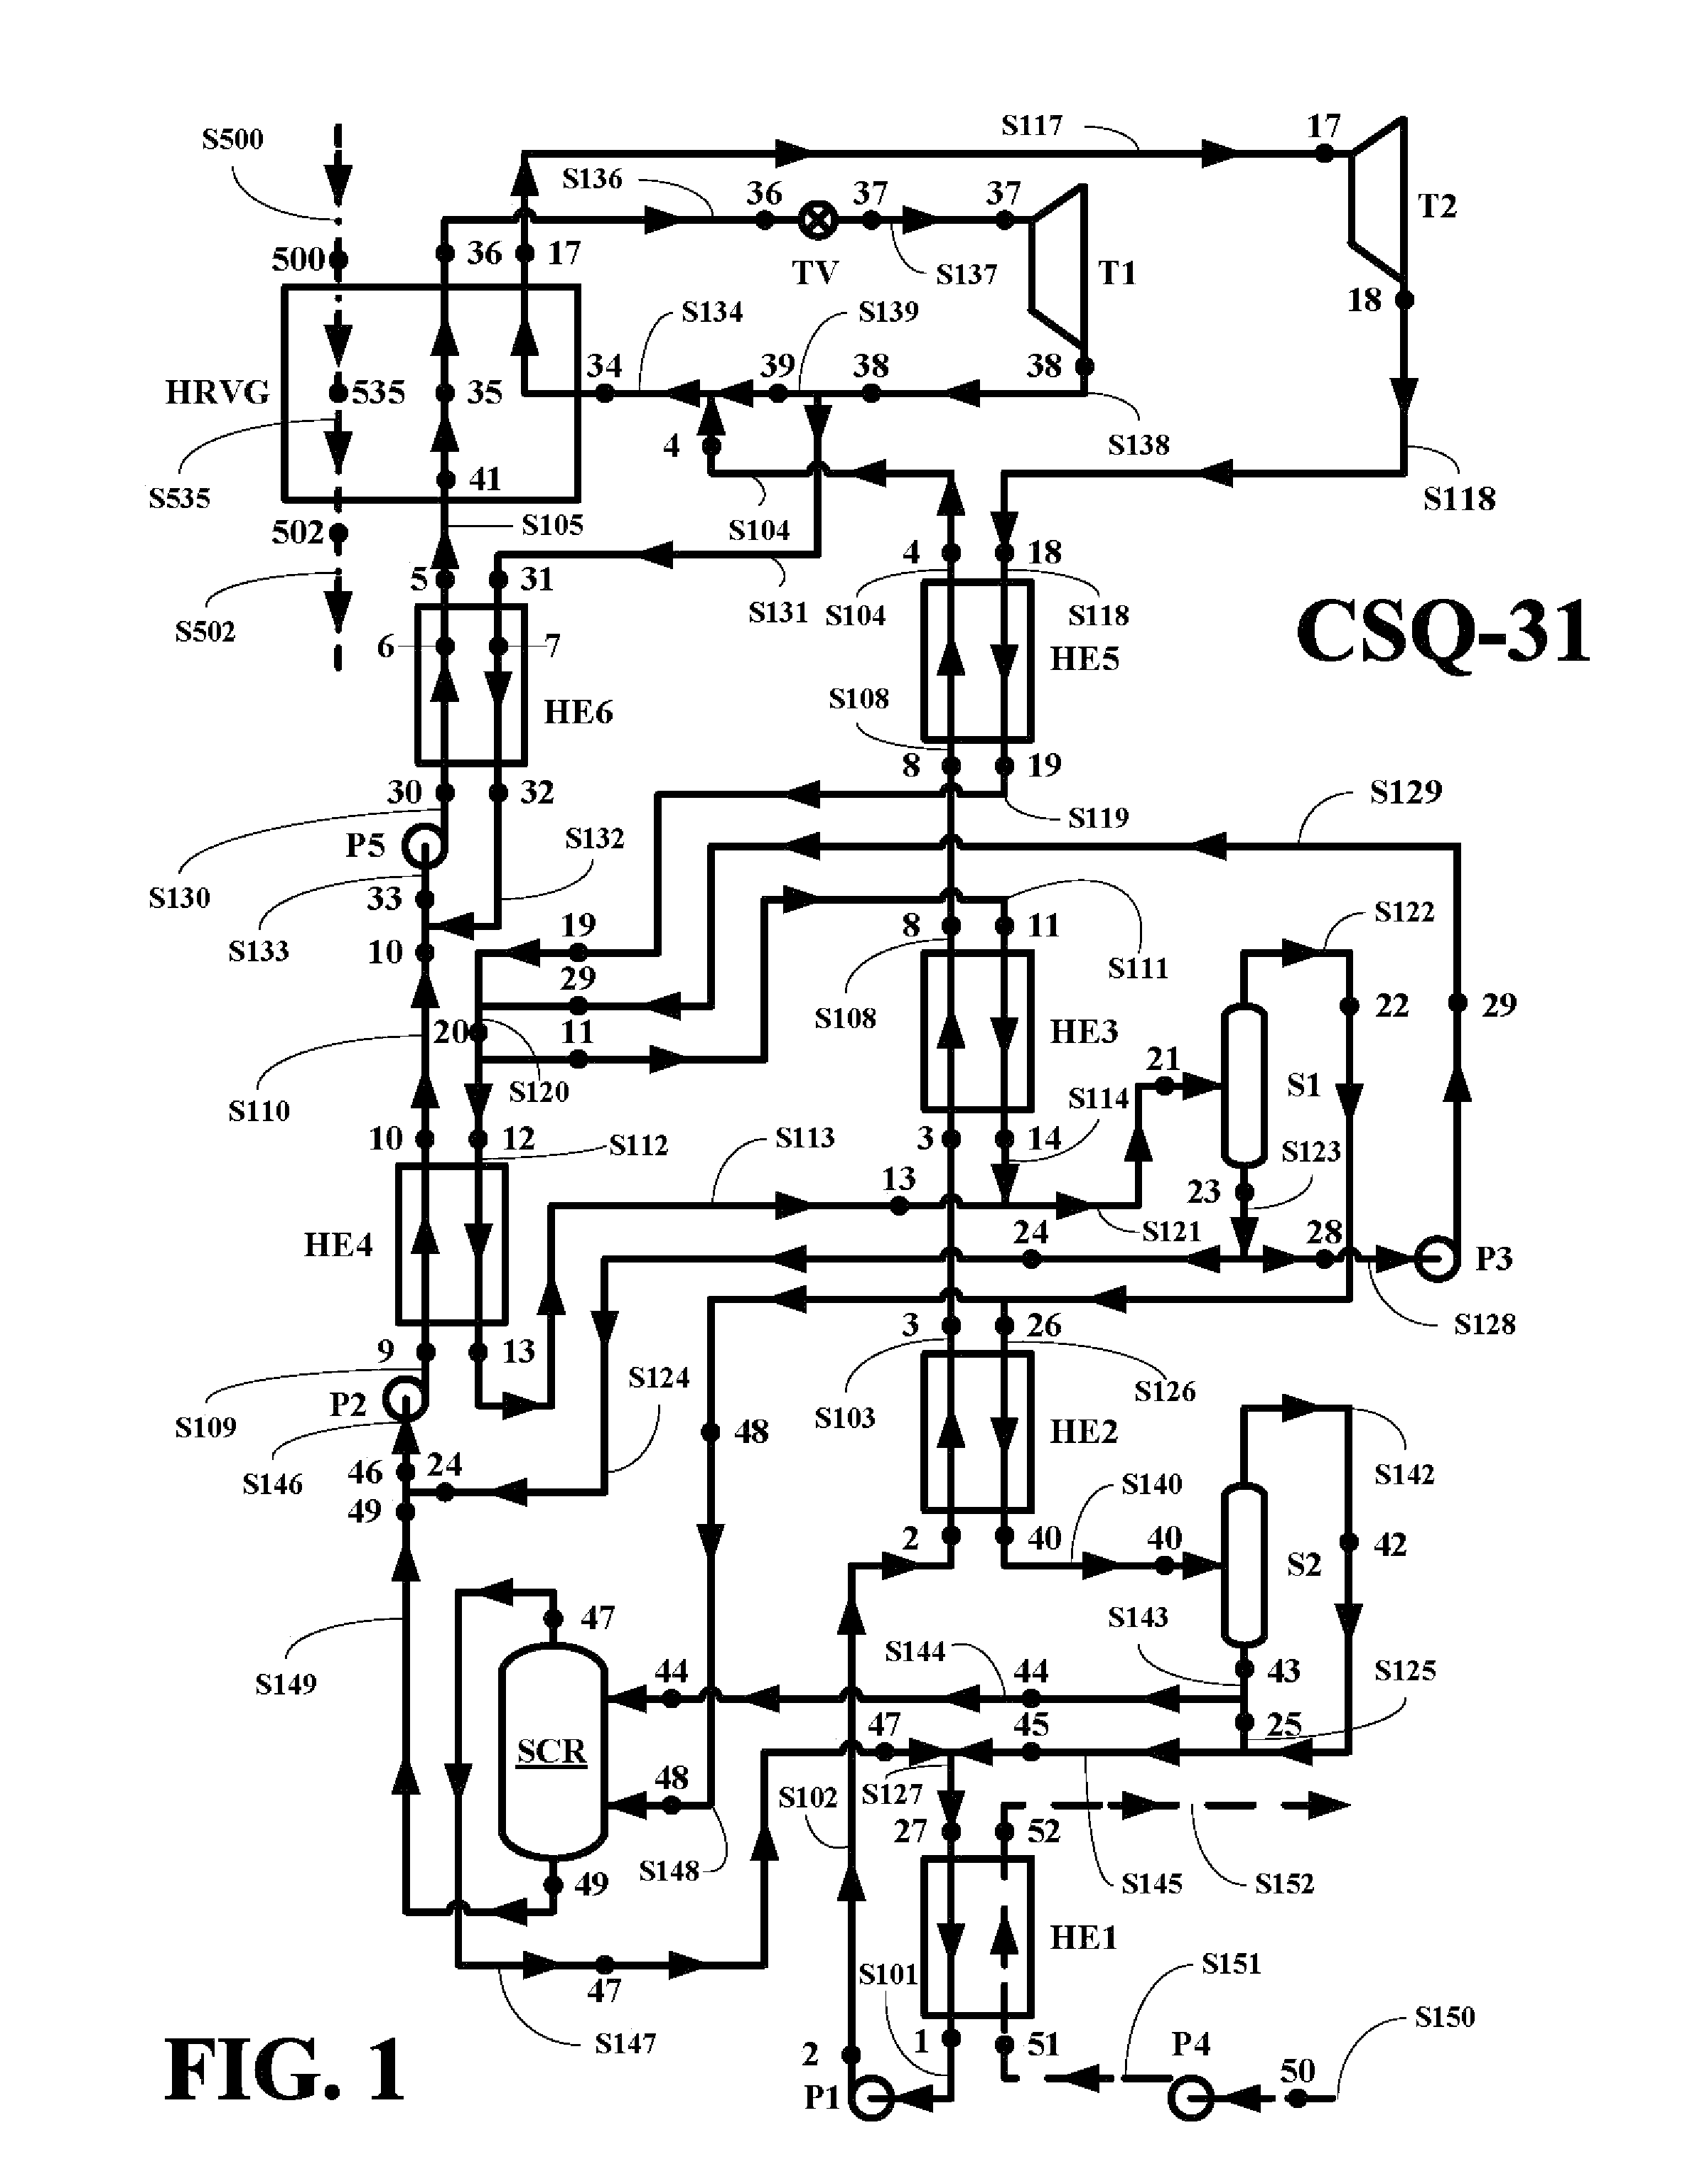 Systems, methods and apparatuses for converting thermal energy into mechanical and electrical power